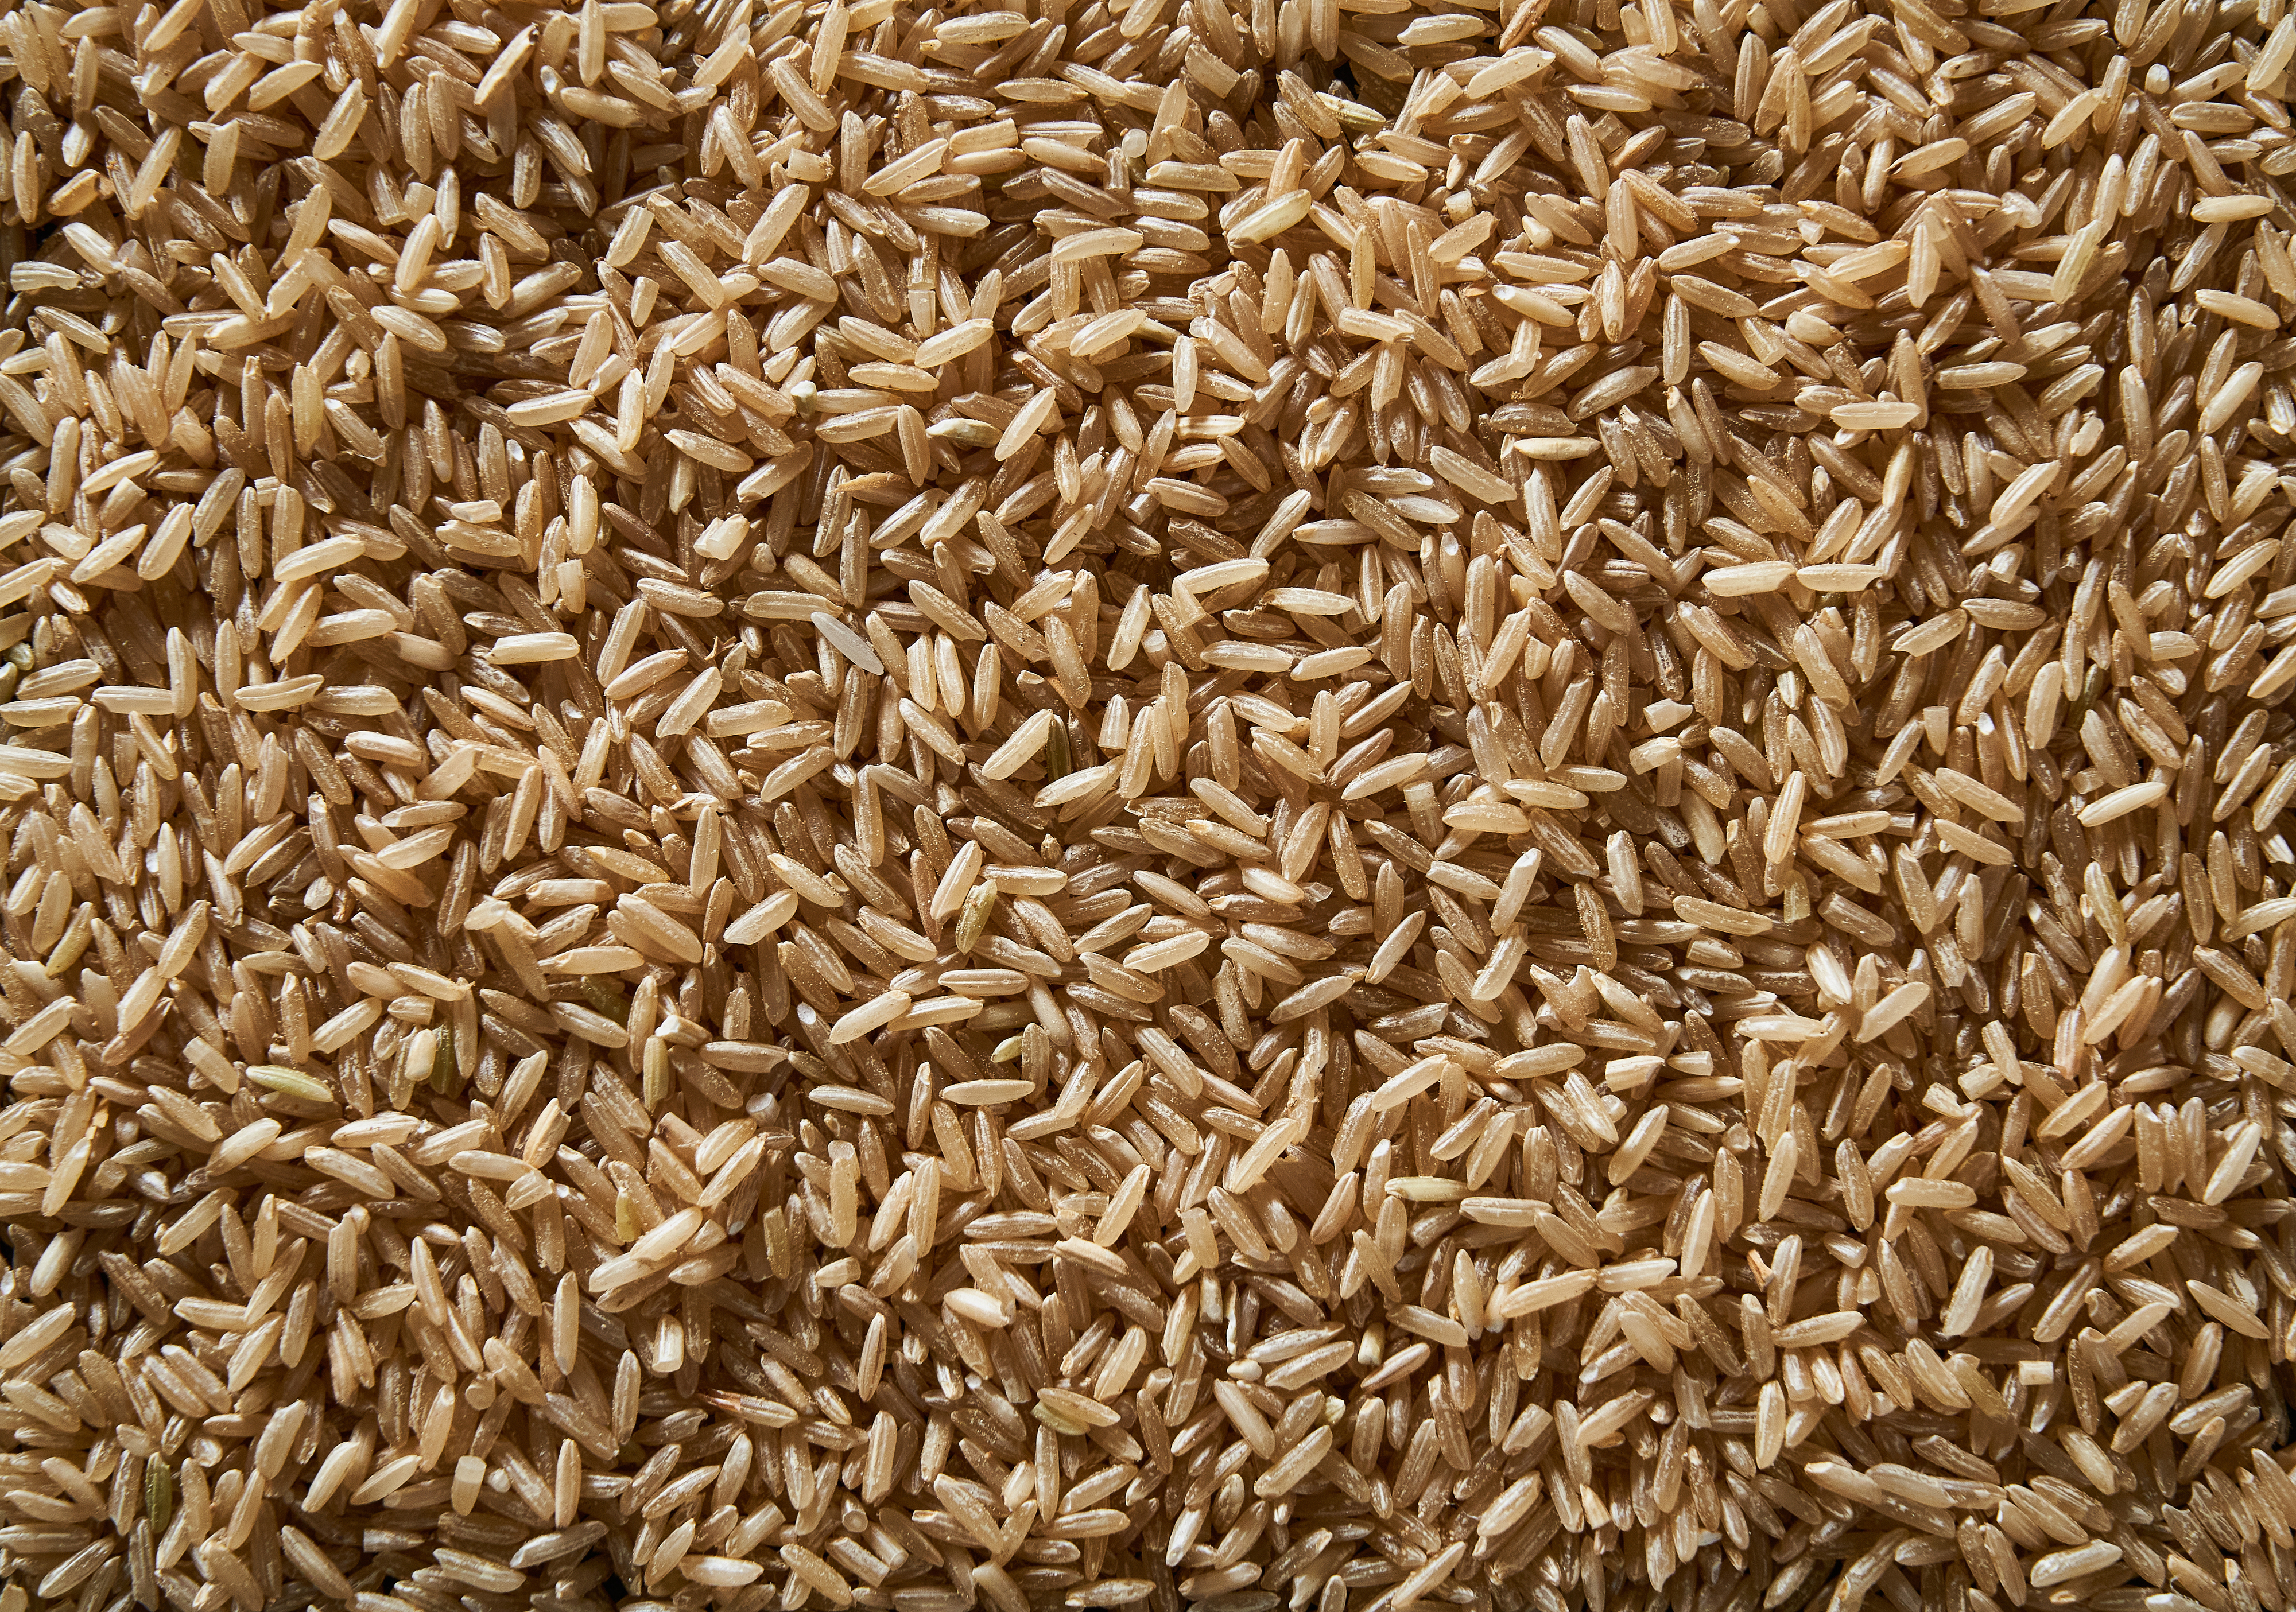 Close-up of uncooked brown rice spread out in abundance